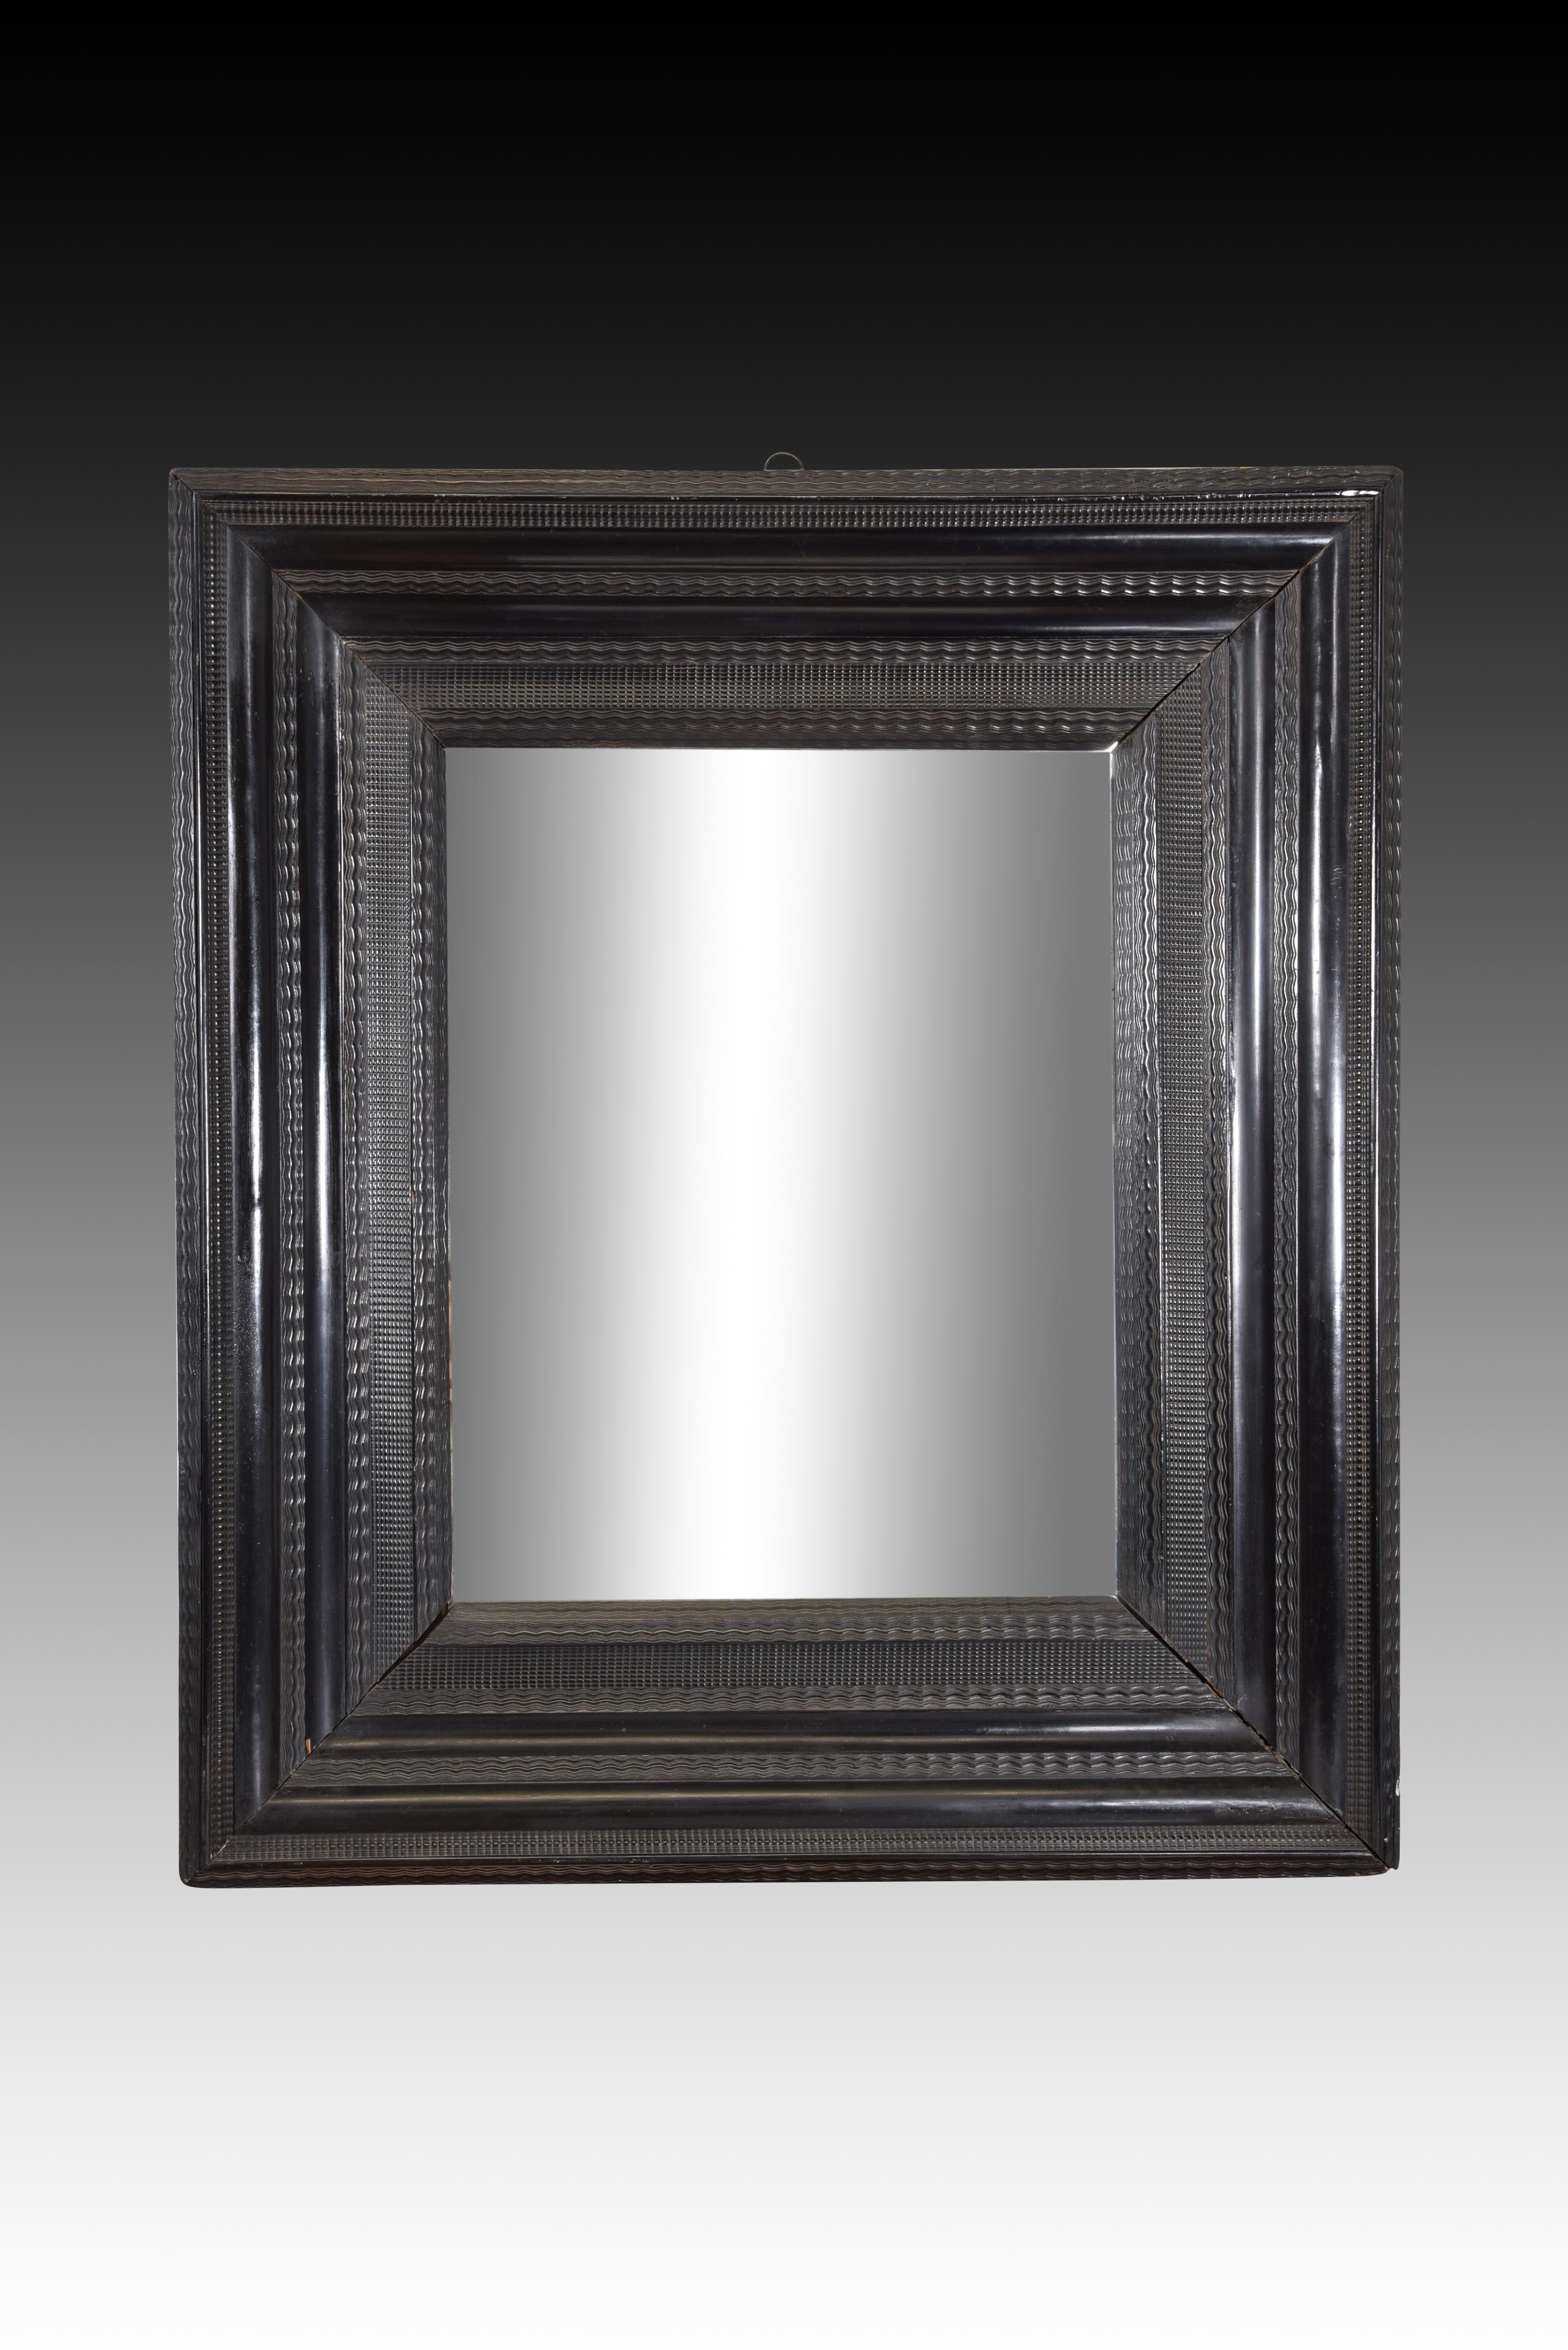 Dutch style curly frame. Ebony, wood. 17th century. 
Rectangular frame made of carved ebony wood and decorated with a series of bands parallel to each other, of different widths and alternating smooth with others of different sizes (waves, small